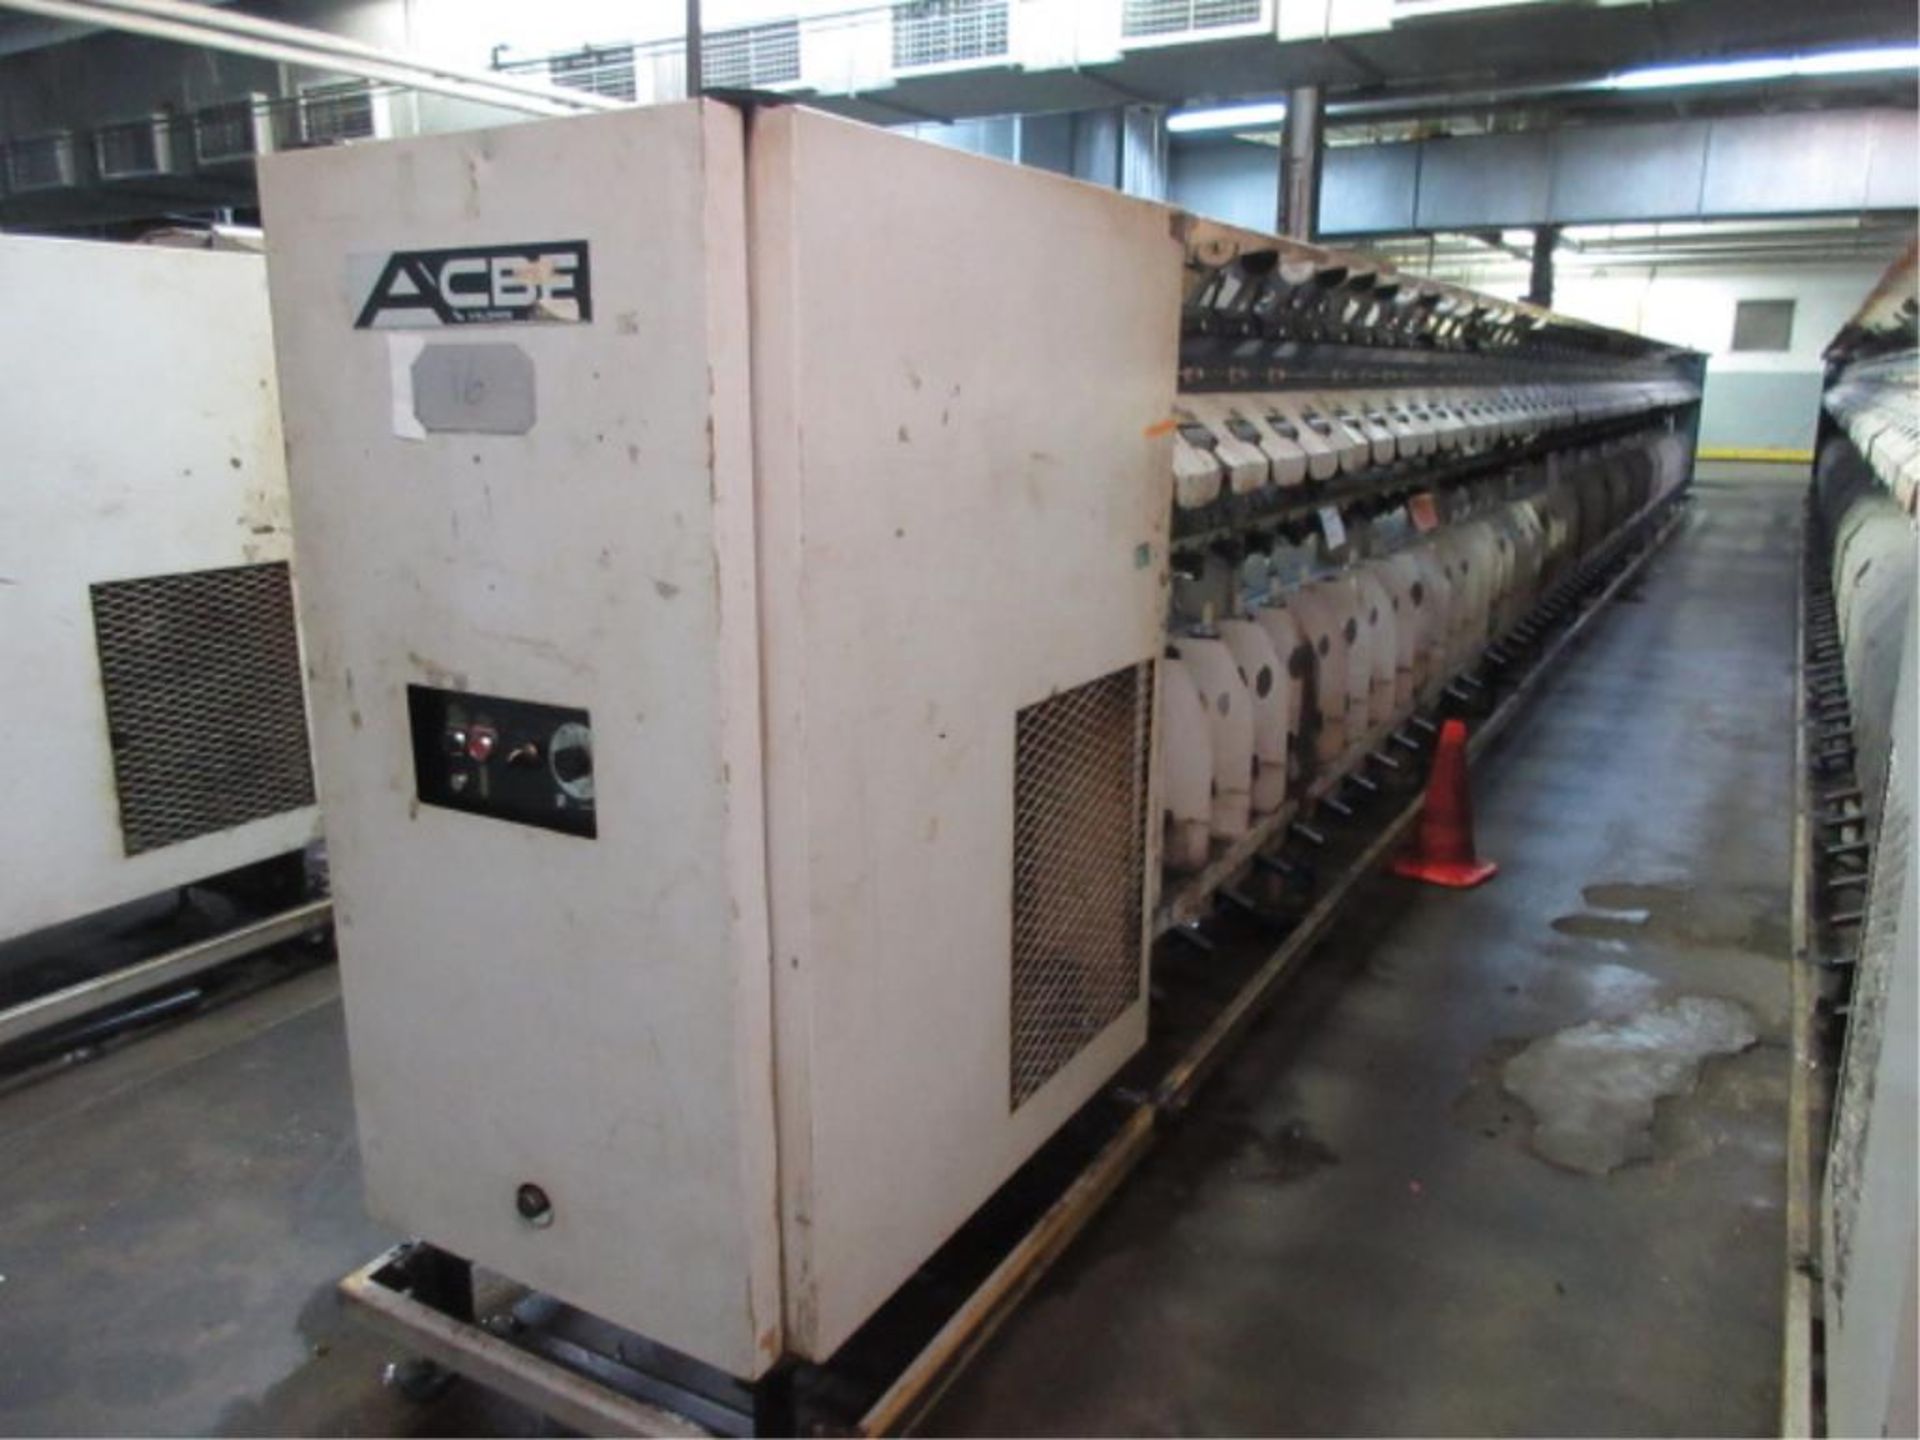 ACBF 3055 BI 2X1 Twisting Machine, (1983), 120 spindles, said to be in running condition. SN# T410-